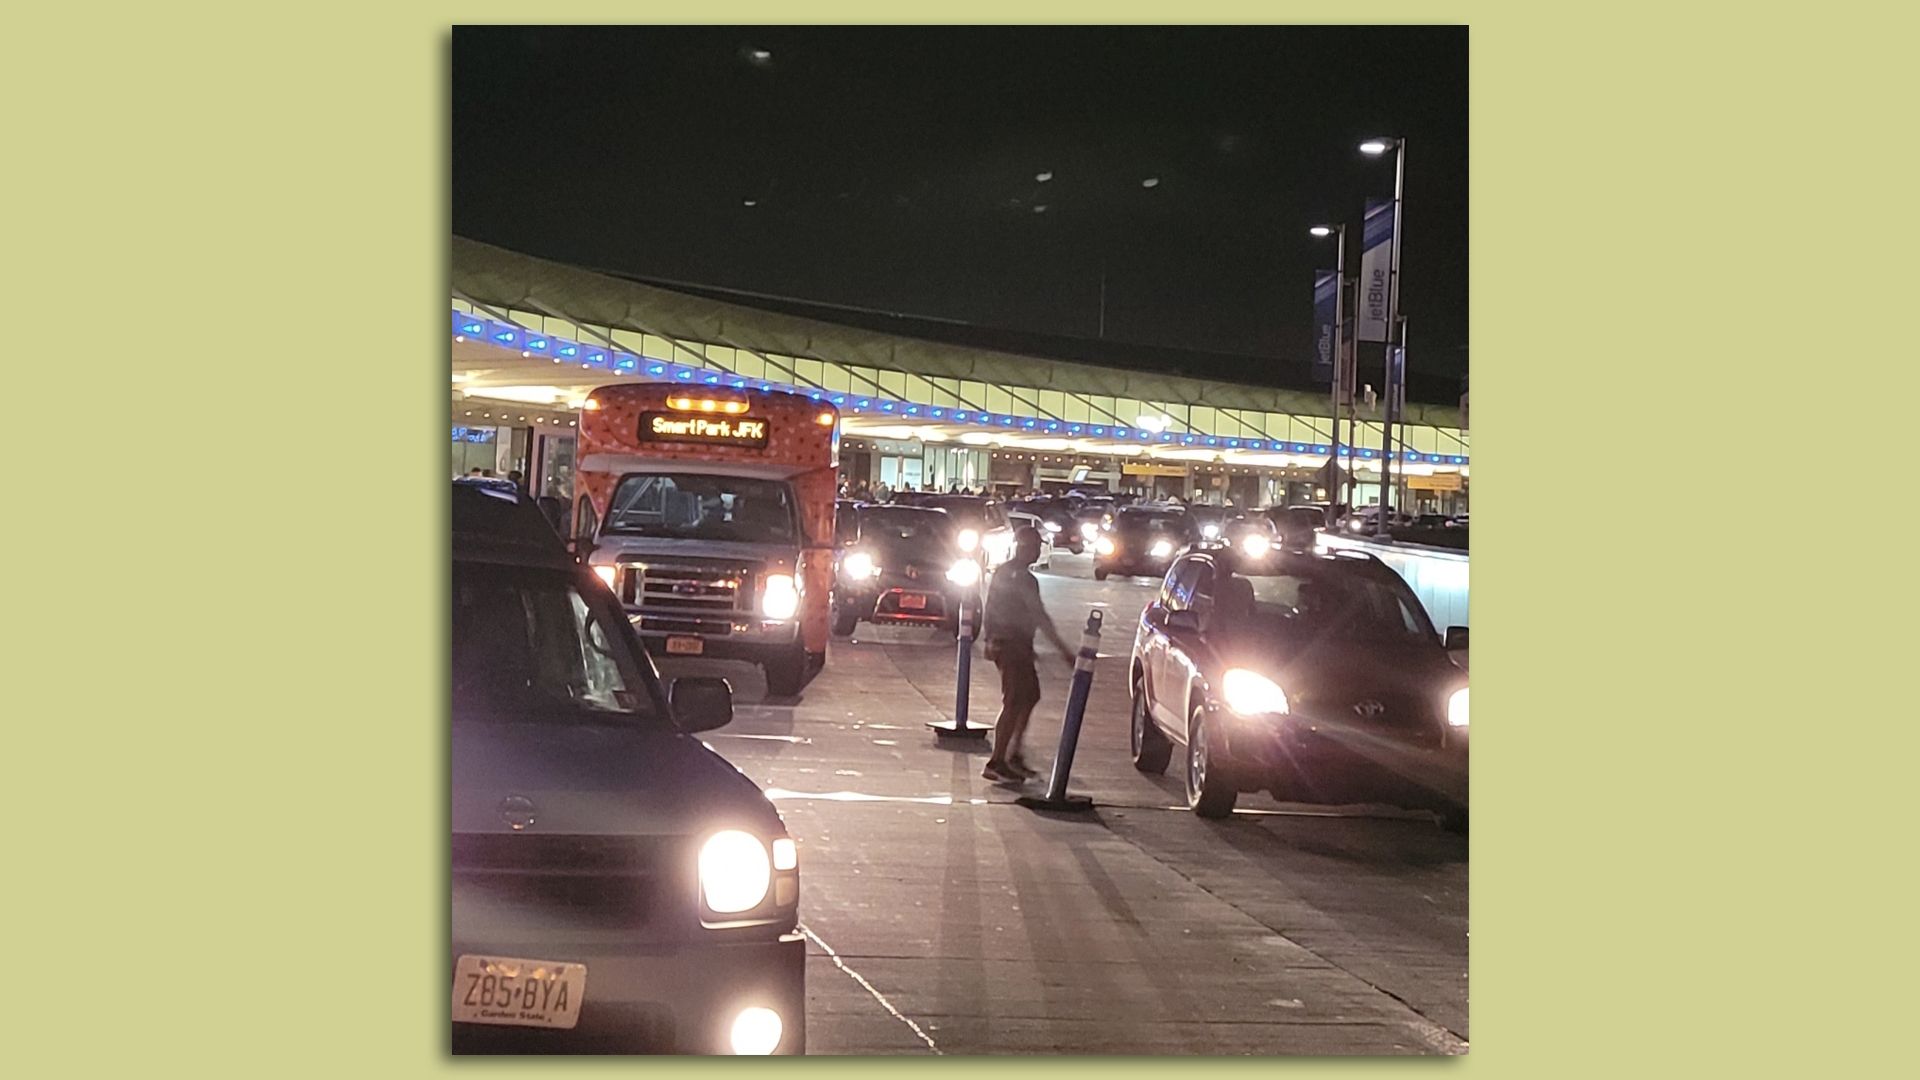 A busy taxi pickup scene at JFK airport in NYC at 4:30 a.m. on a recent weekday.